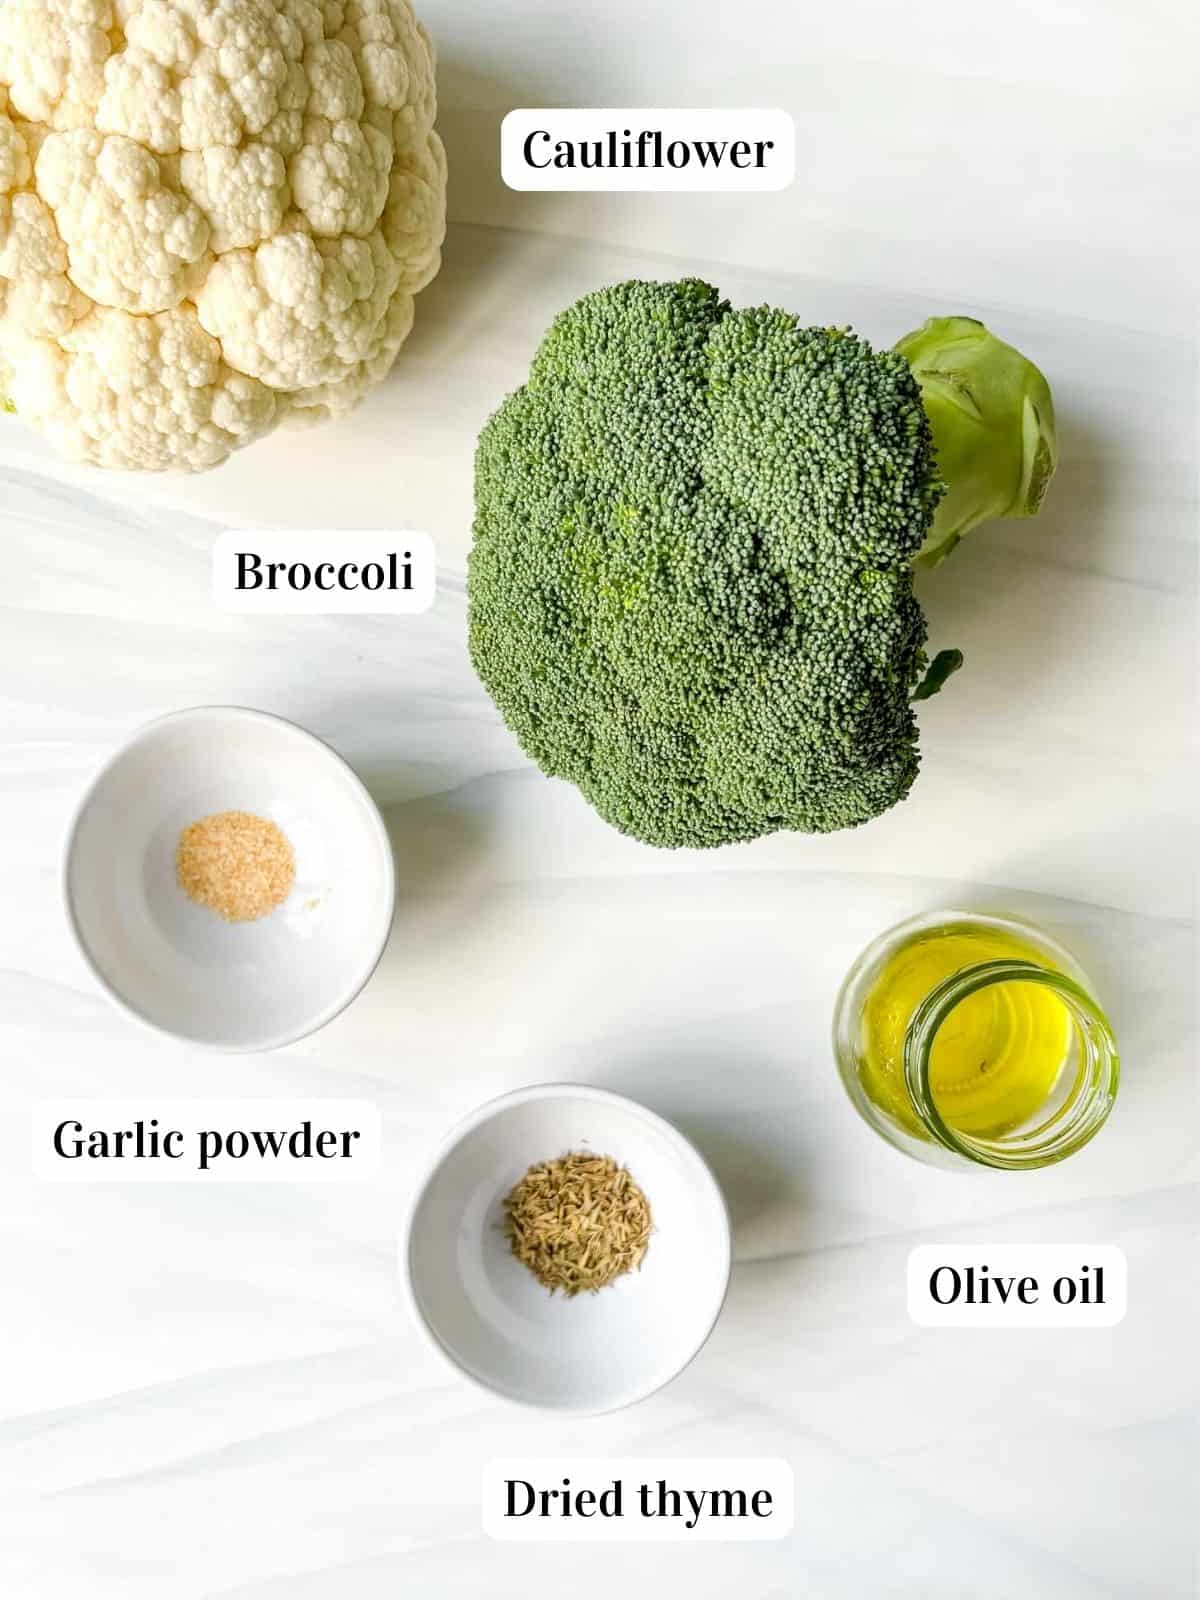 individually labelled ingredients to make air fryer broccoli and cauliflower including garlic powder, olive oil and thyme.